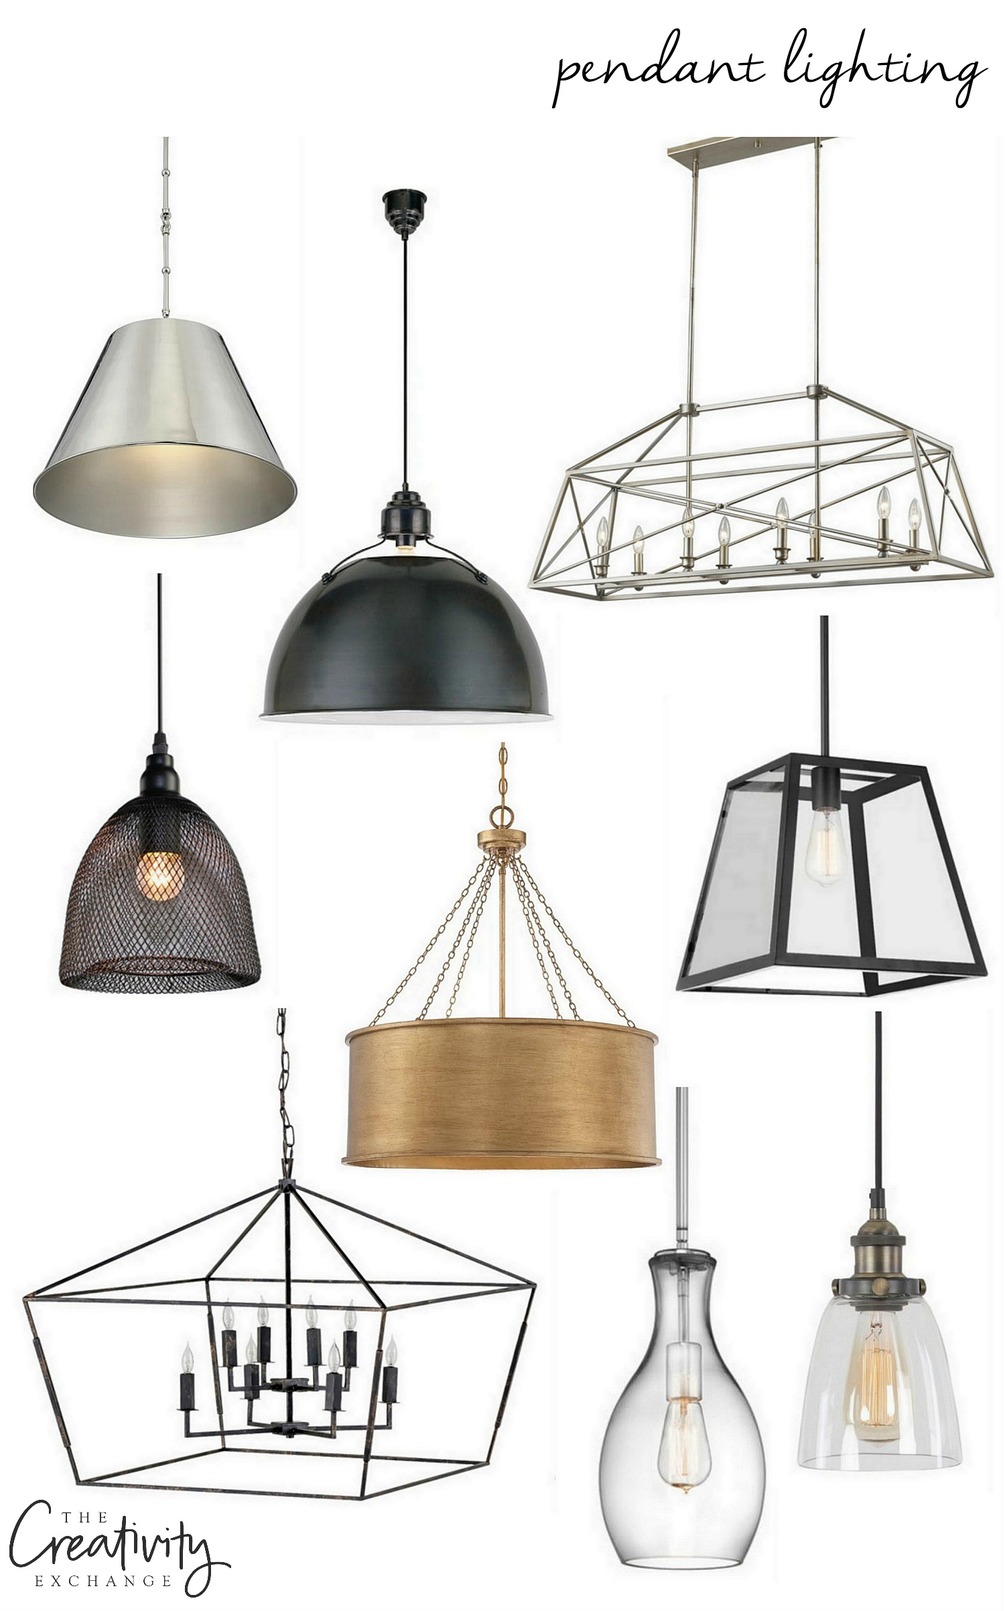 Everything you wanted to know about pendant lights